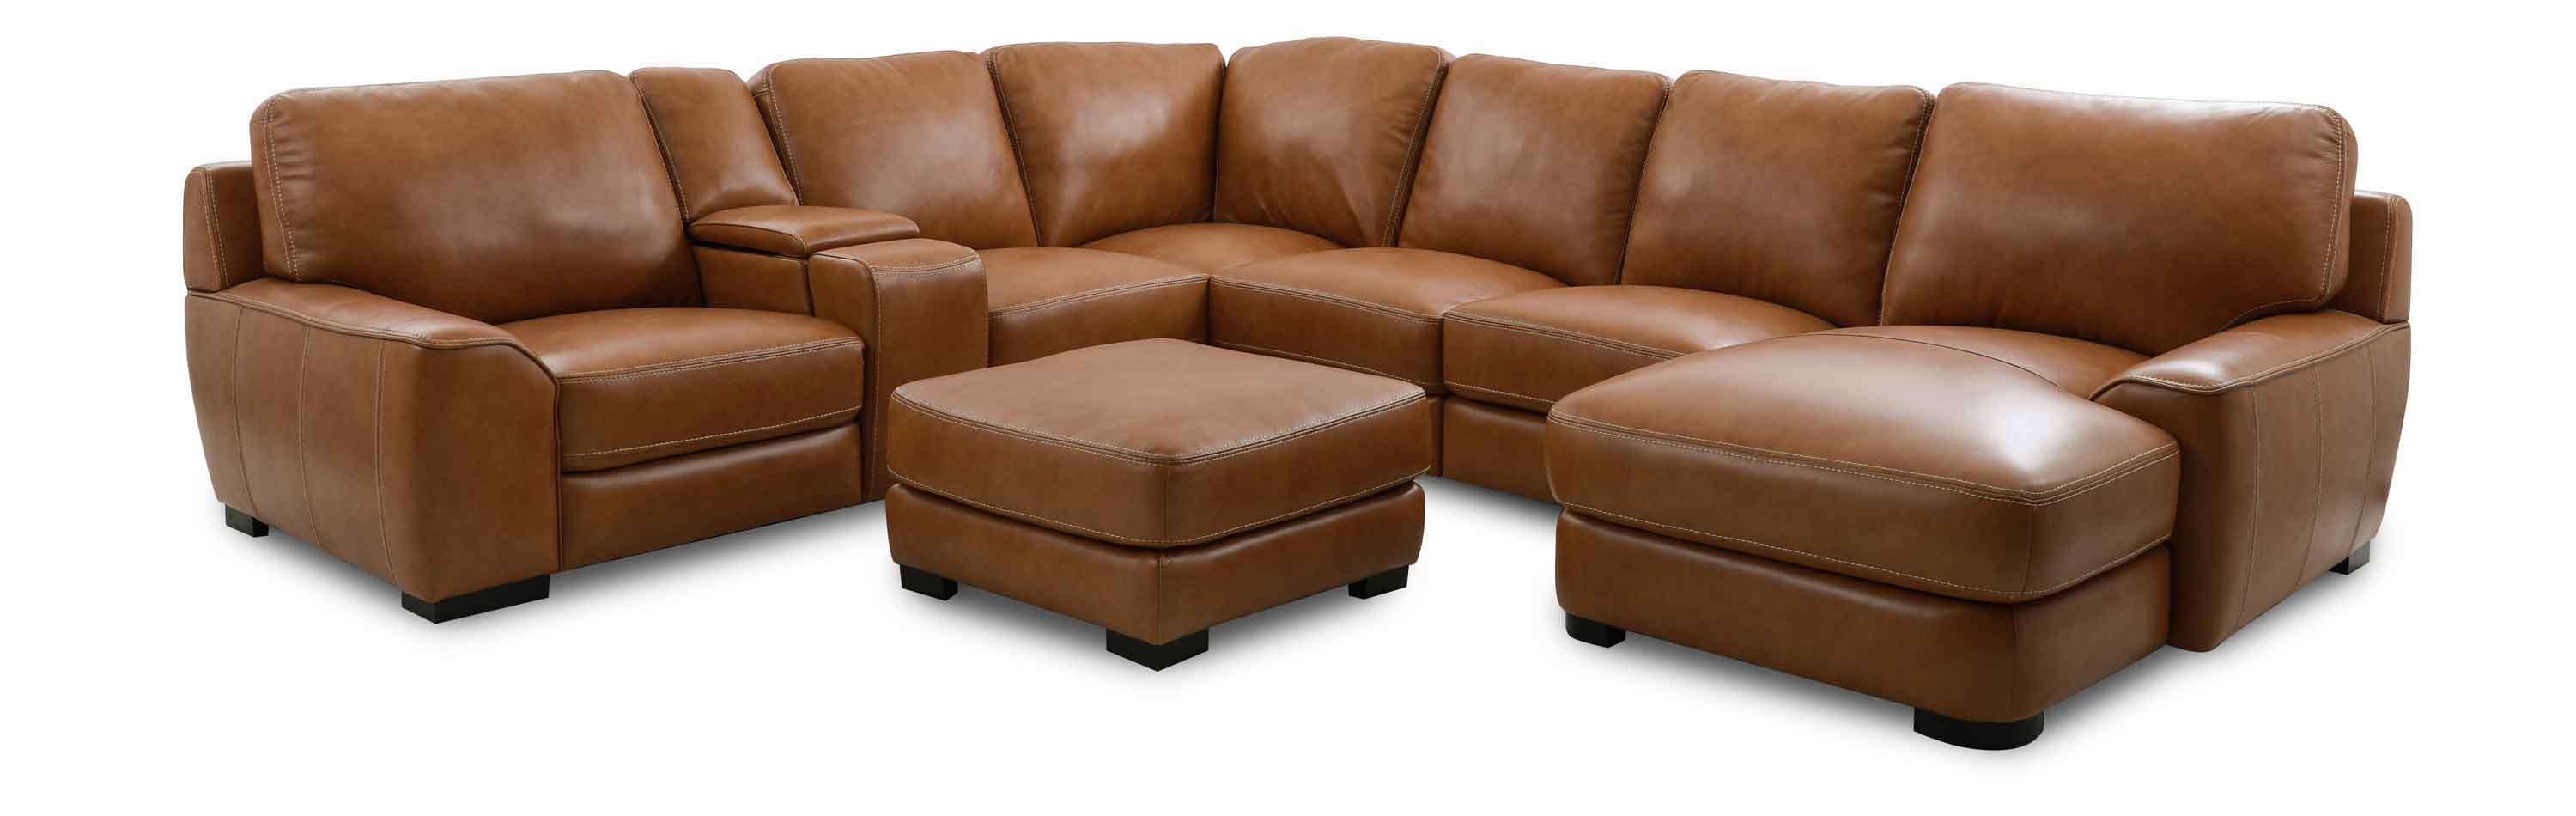 The Cheers Palomino Sectional Product Review